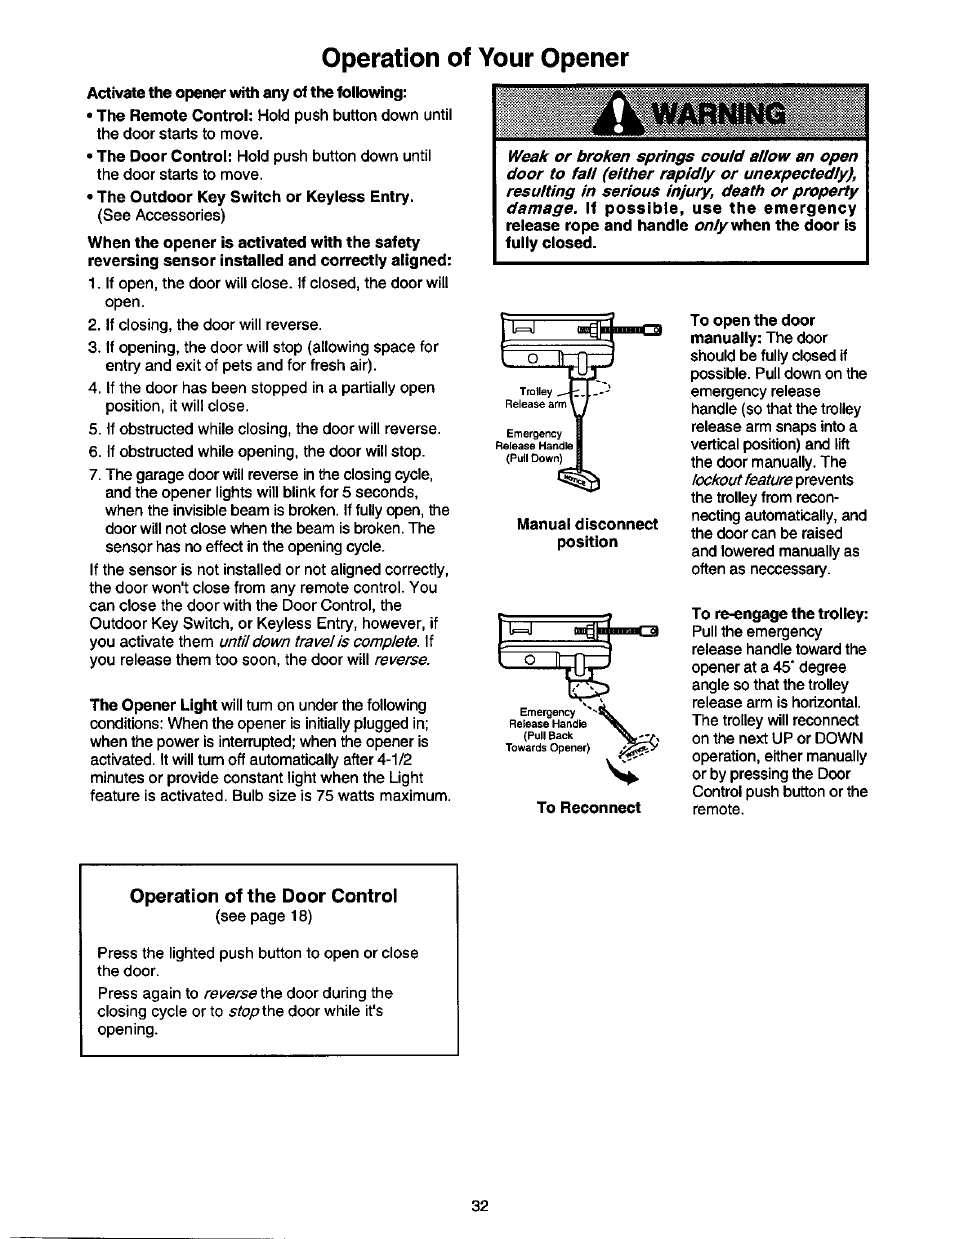 Operation of your opener, Operation of the door control Craftsman 1/2